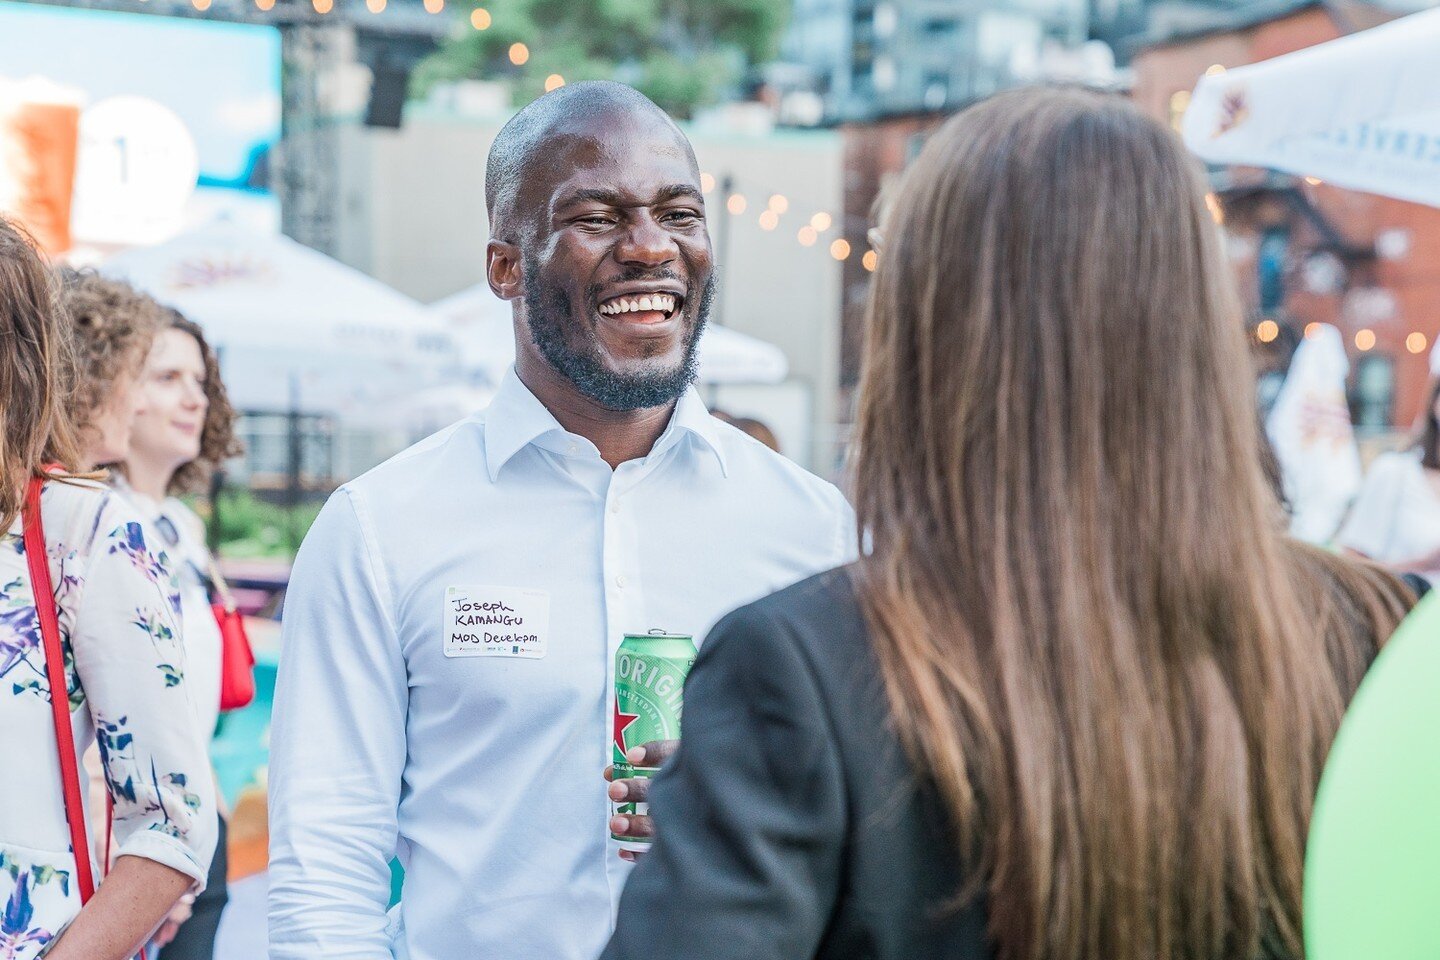 At last year's ULI Toronto Summer Social, professionals from the real estate and development industries gathered for a memorable networking event. The RendezViews patio, generously hosted by The Fifth Social Club and The Ballroom owners, created a re